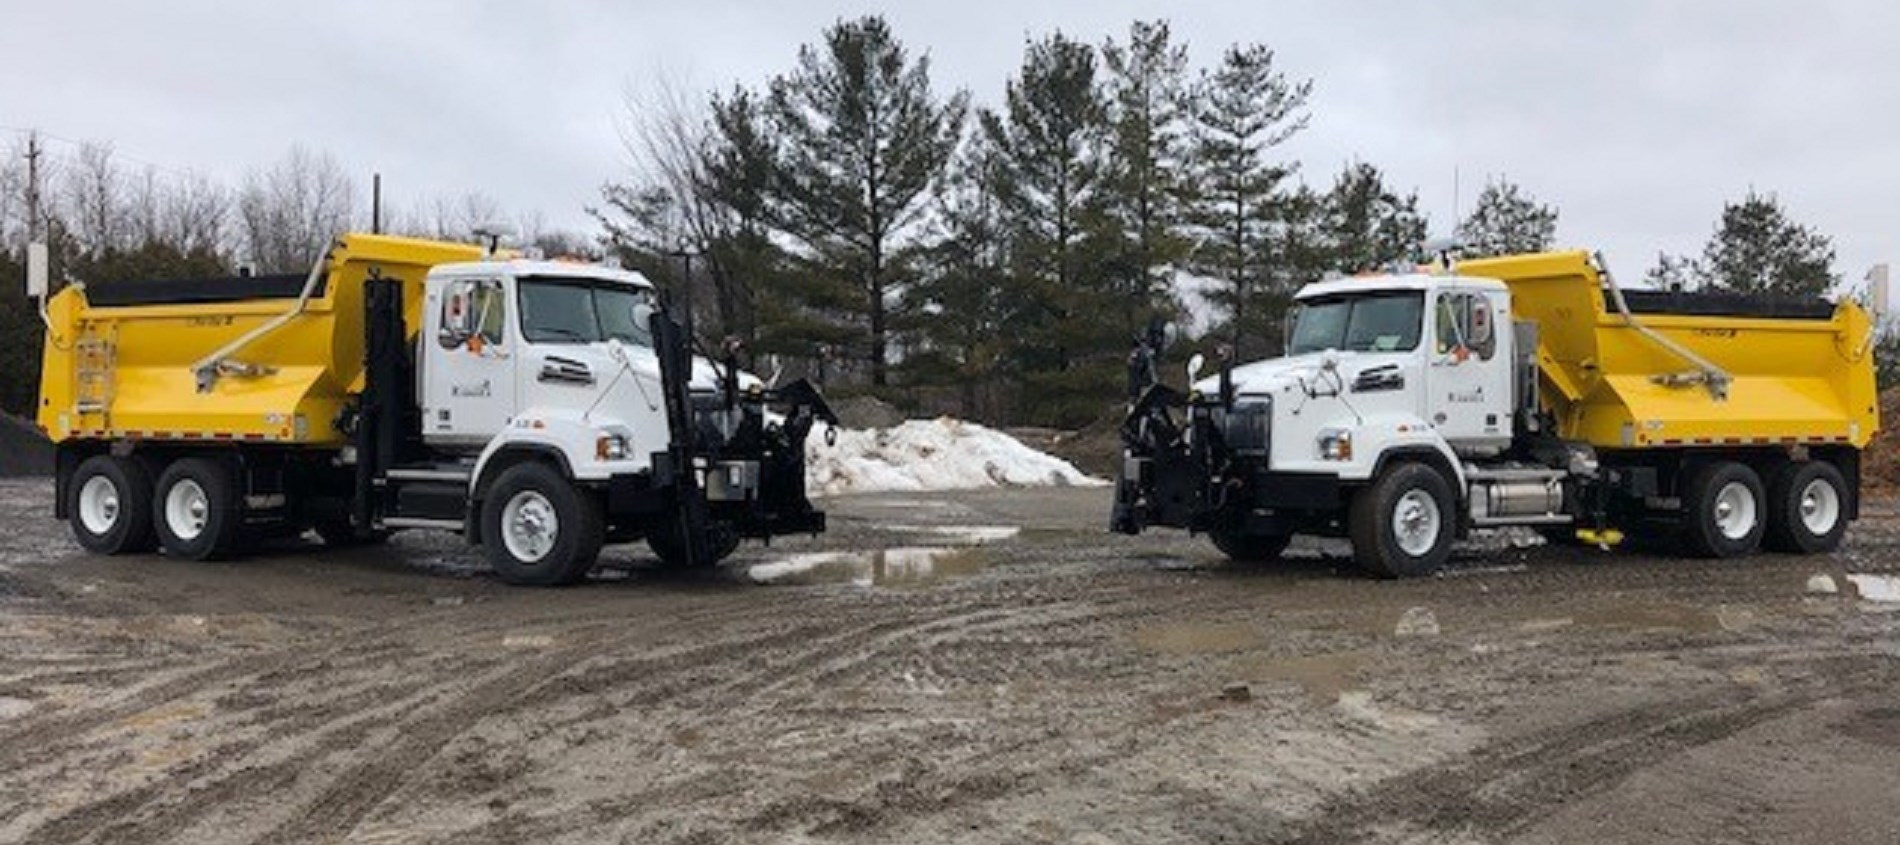 Picture of two plow trucks